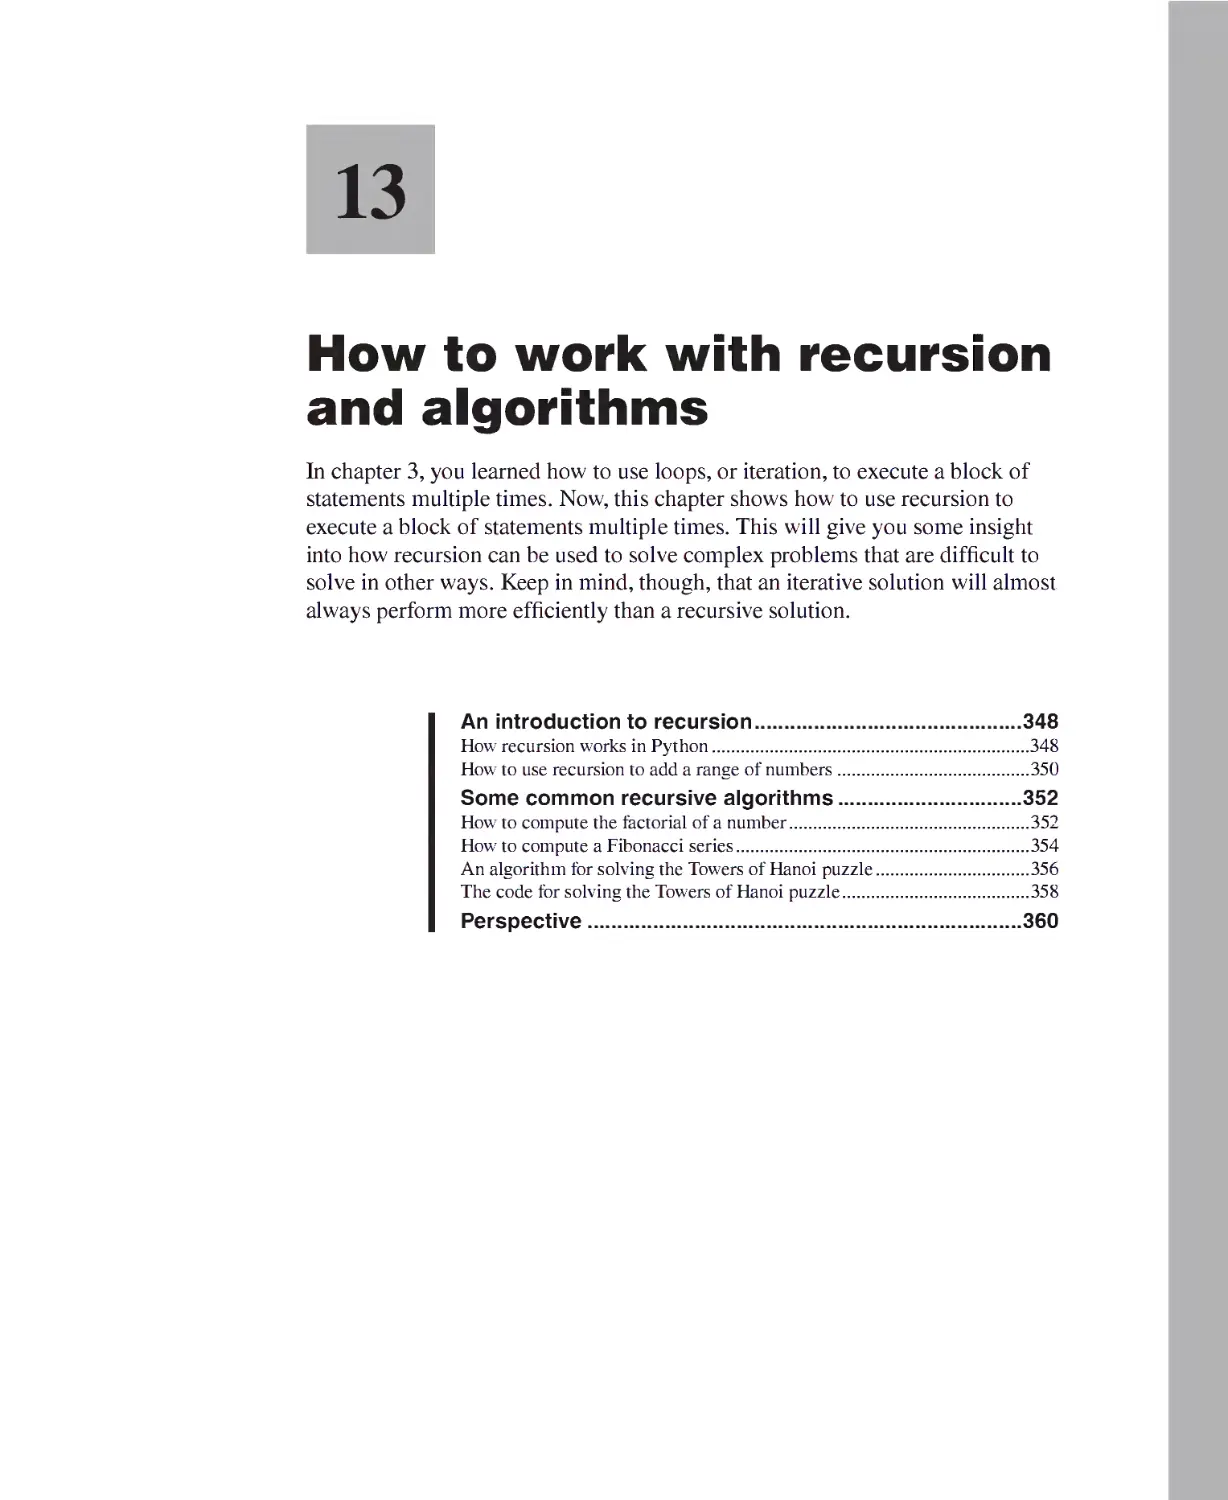 Chapter 13 - How to Work with Recursion and Algorithms